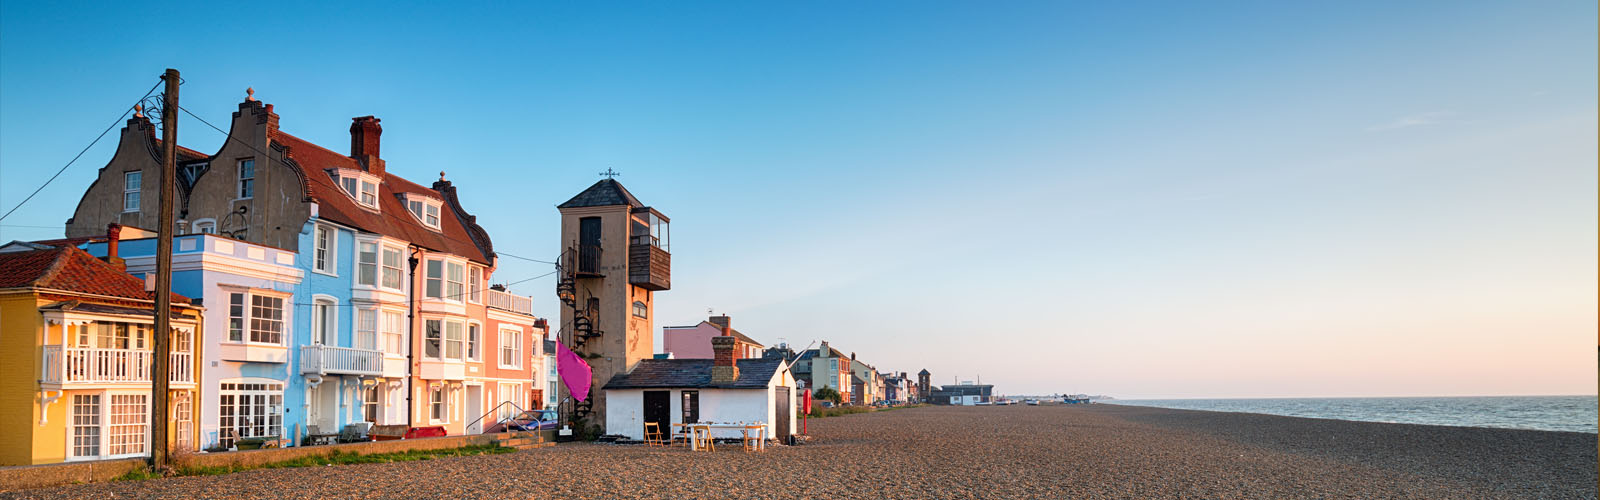 The seafront and beach in Aldeburgh on the Suffolk coast.